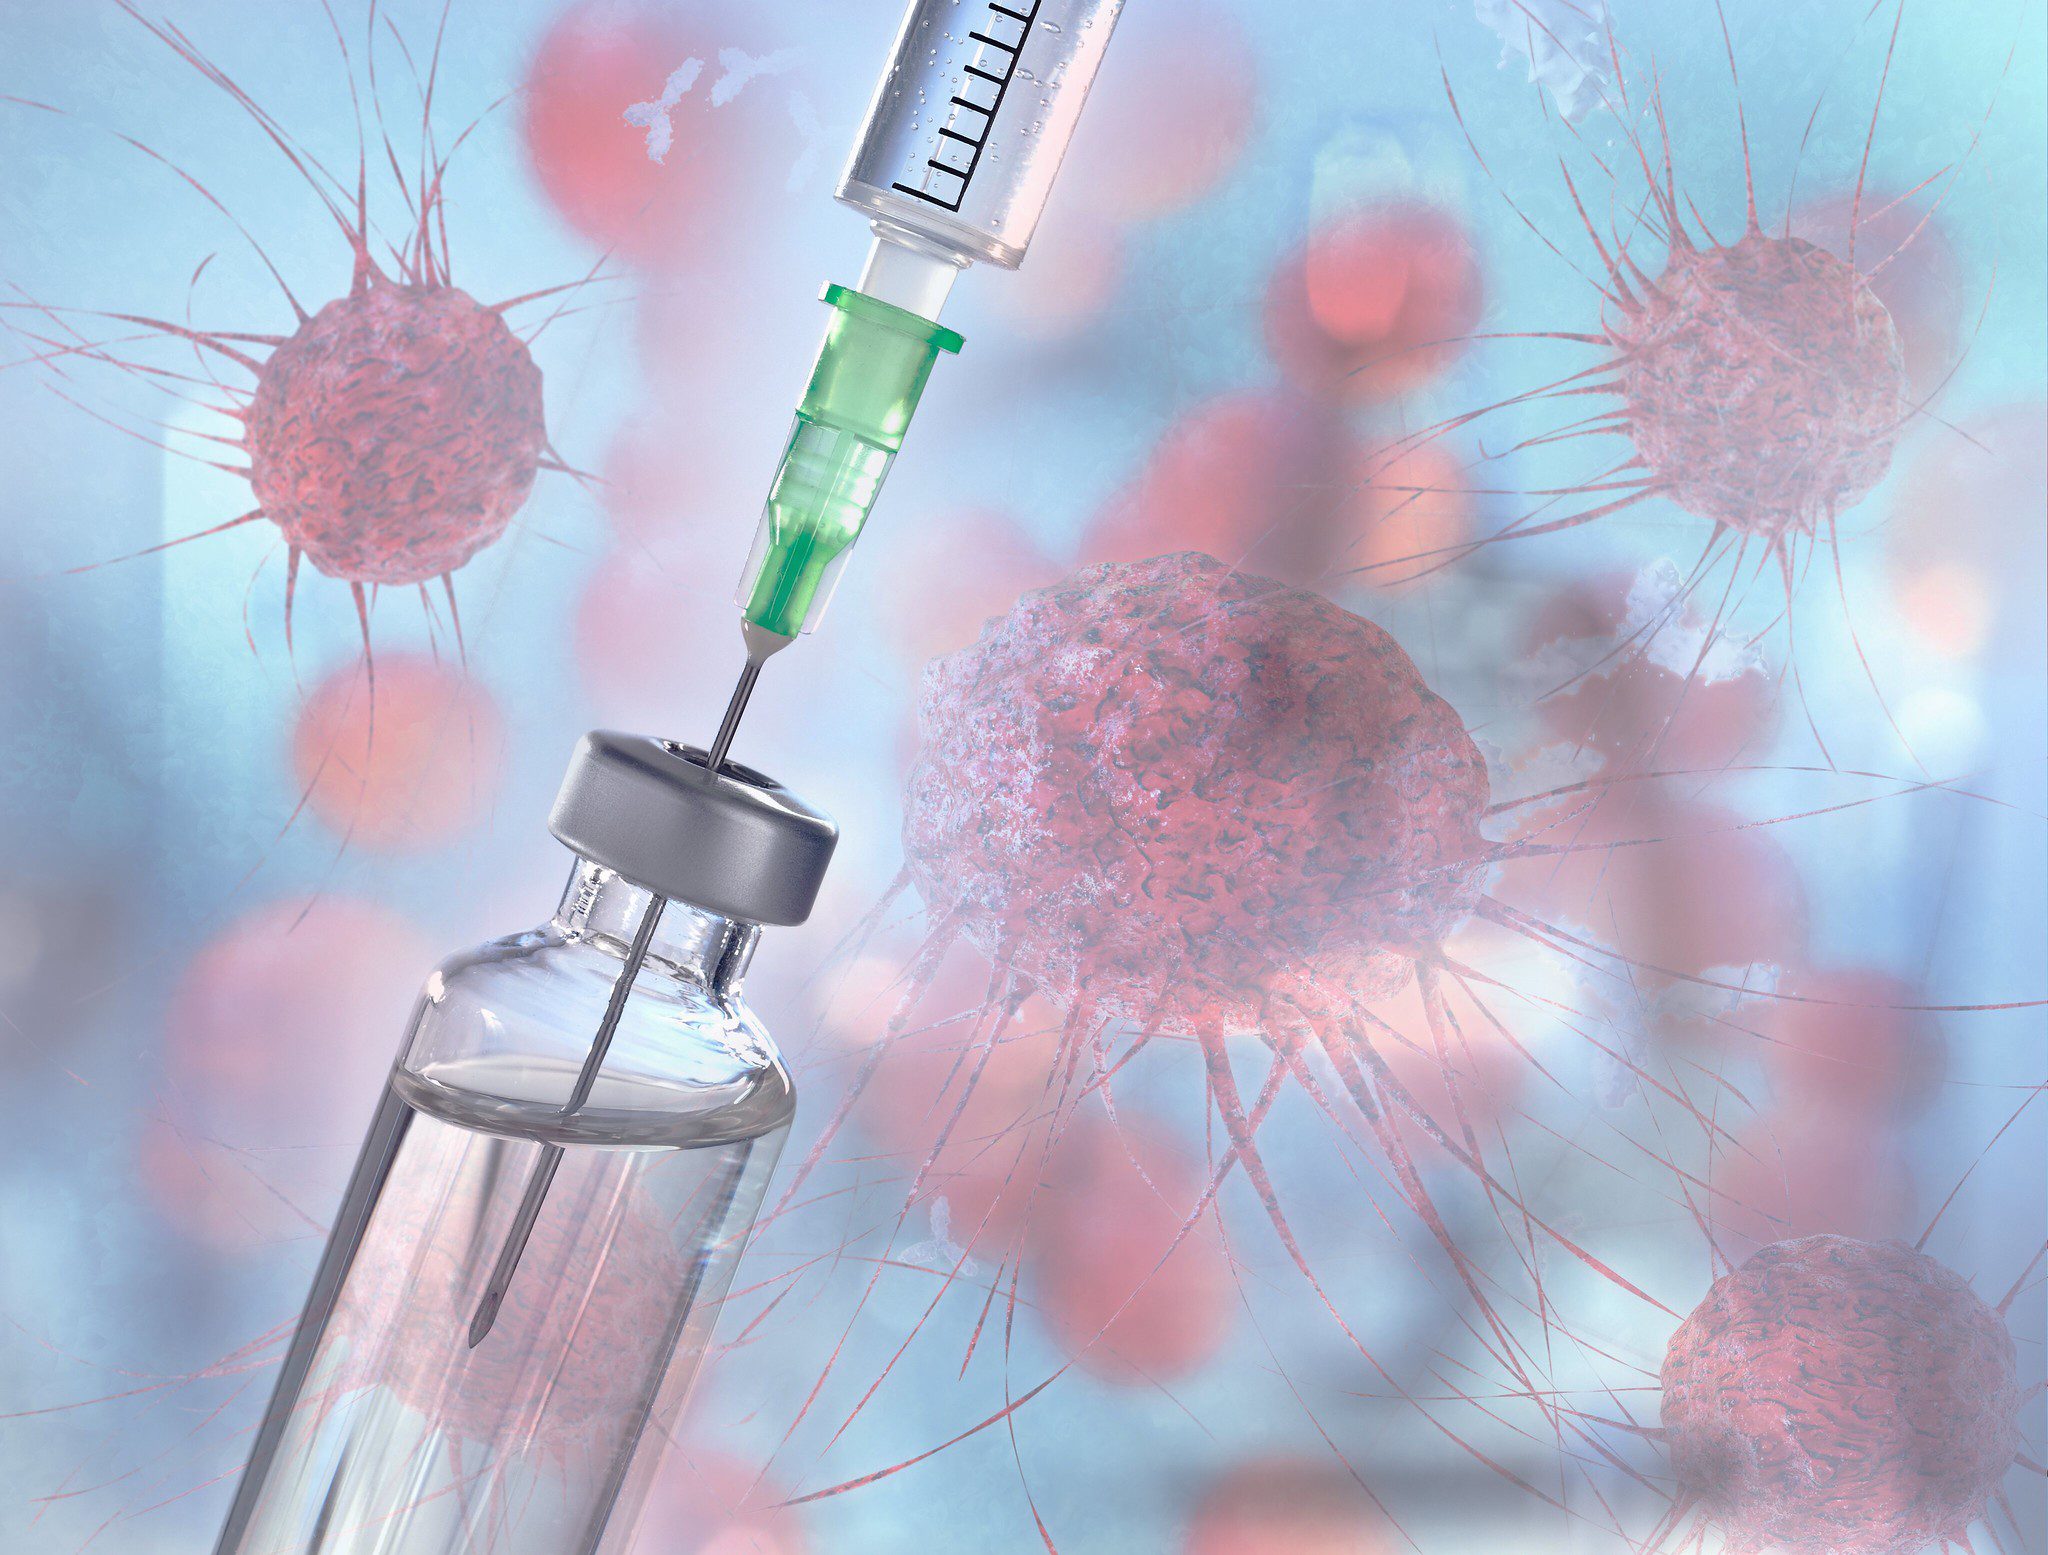 Some Cancers are Preventable with a Vaccine